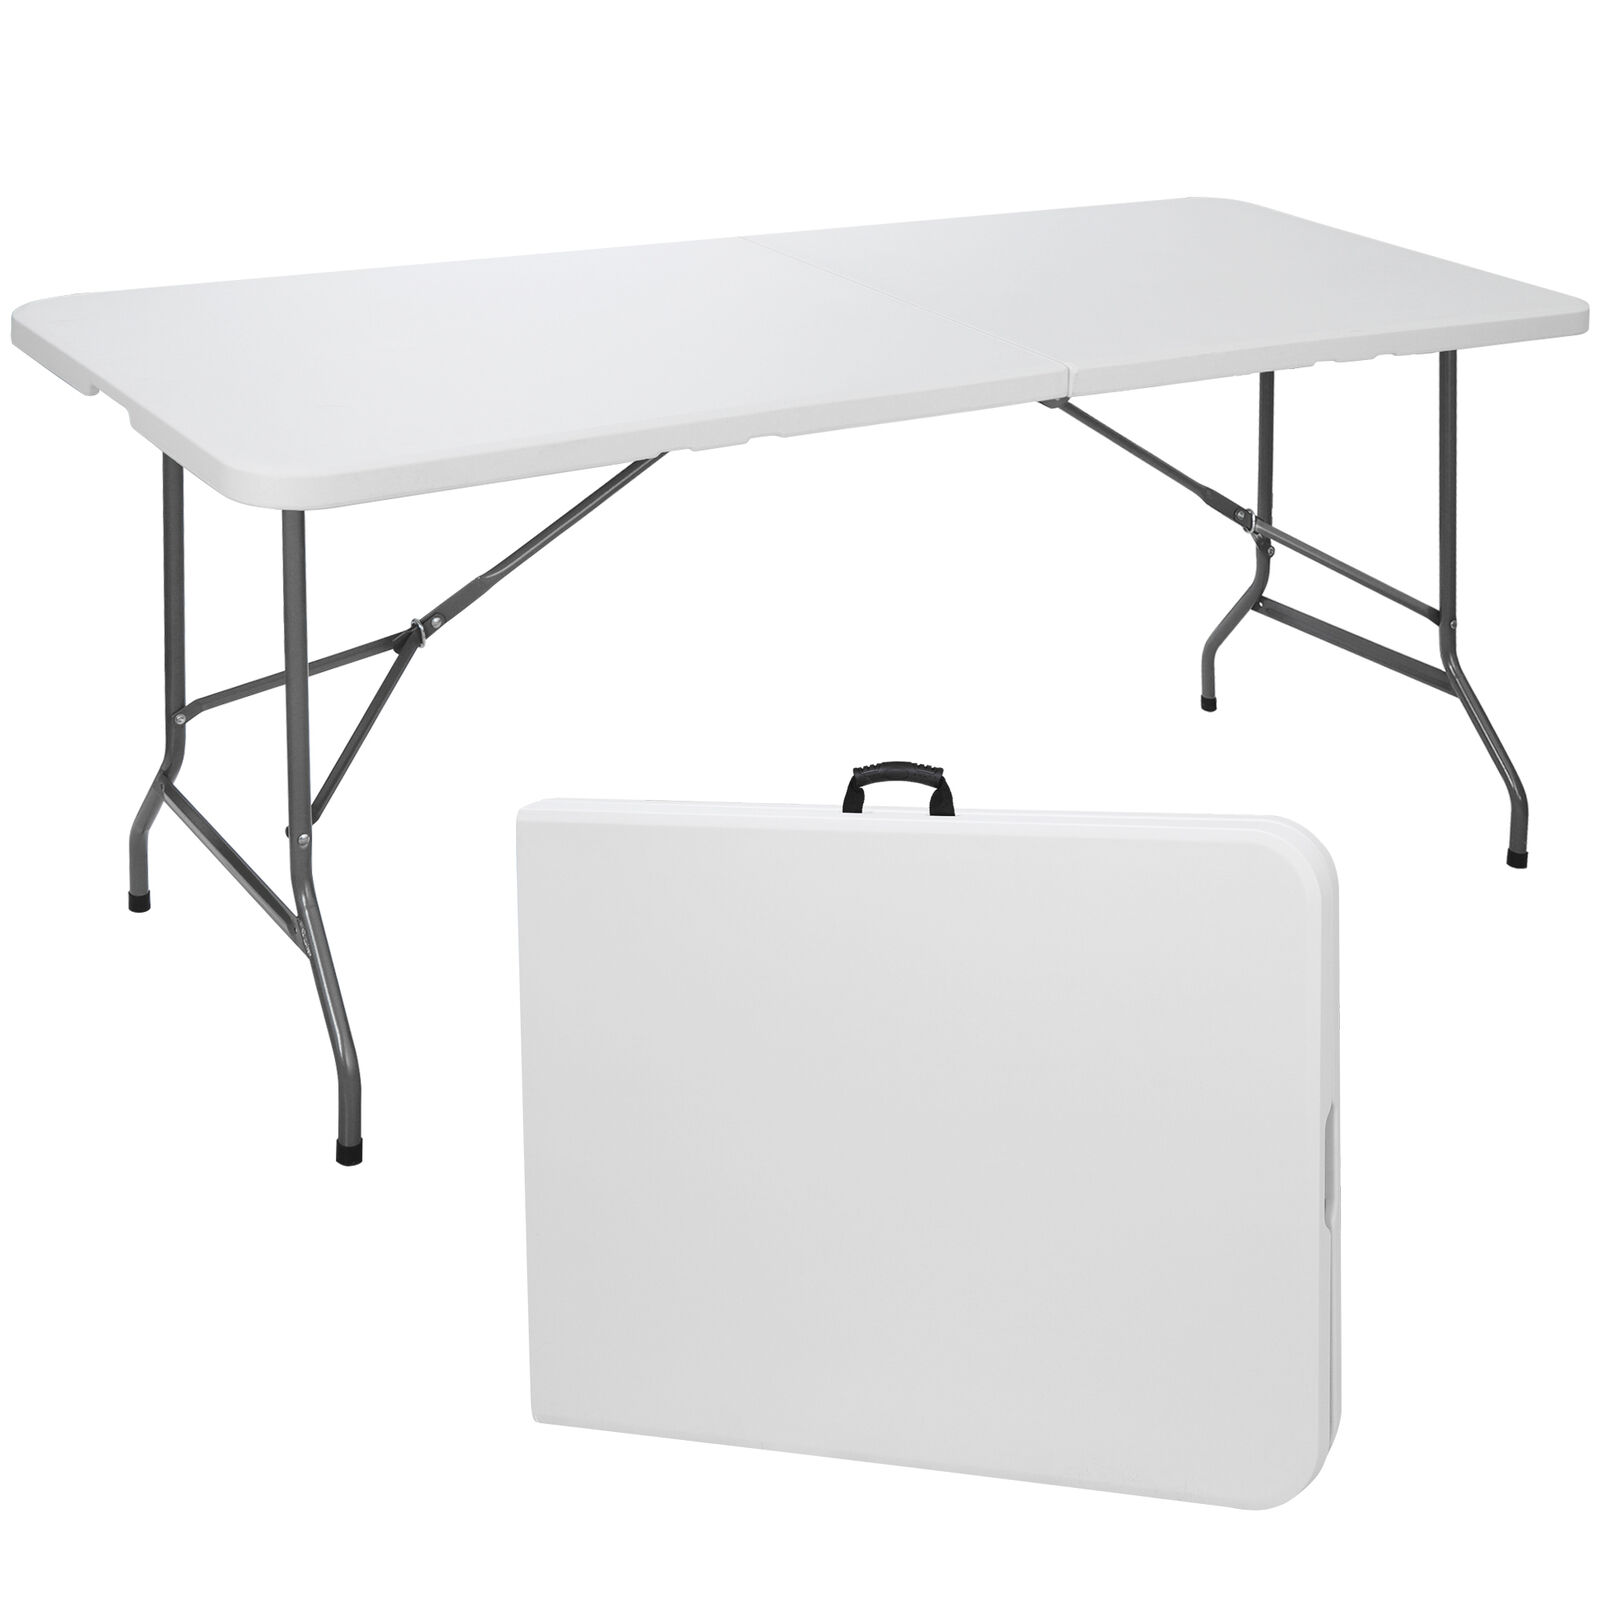 6' Portable Folding Table Plastic Indoor Outdoor Picnic Party Camp Dining White